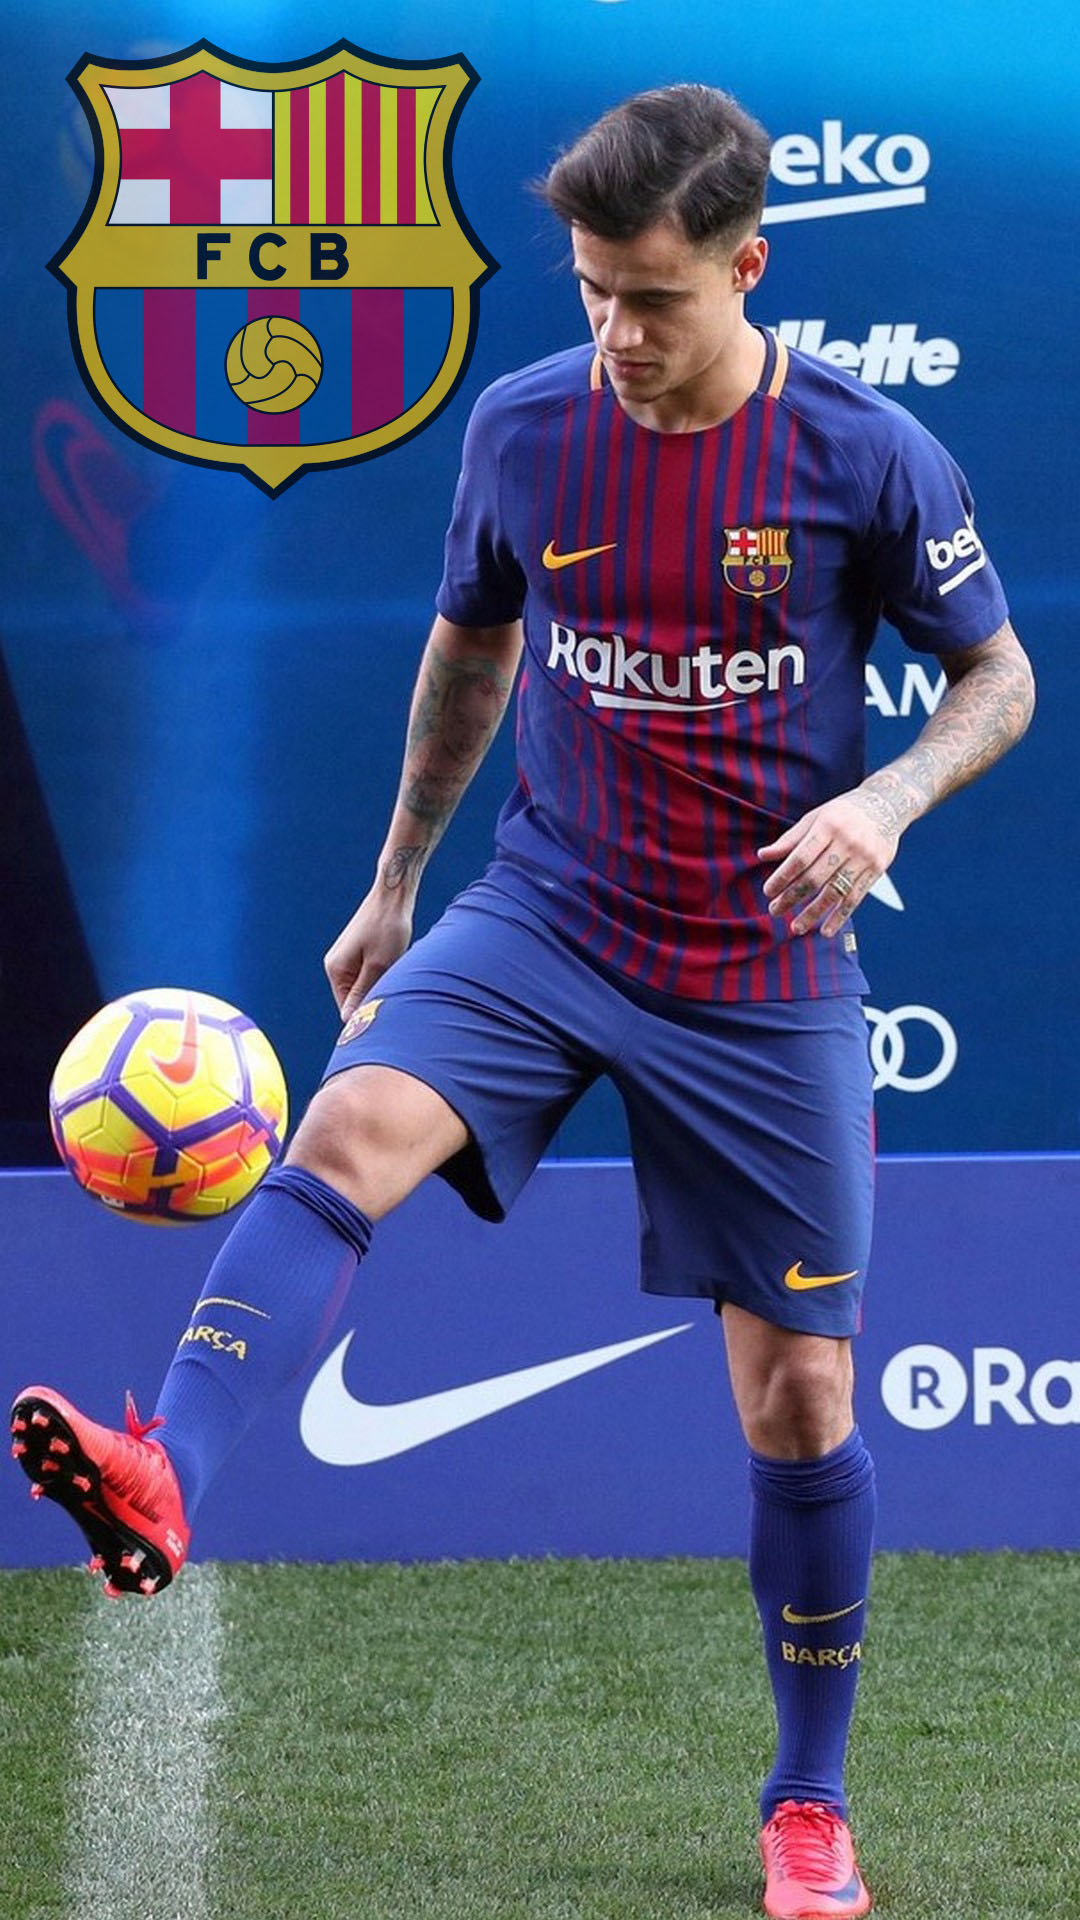 fc barcelona wallpaper for android,sports,soccer player,ball game,football player,player